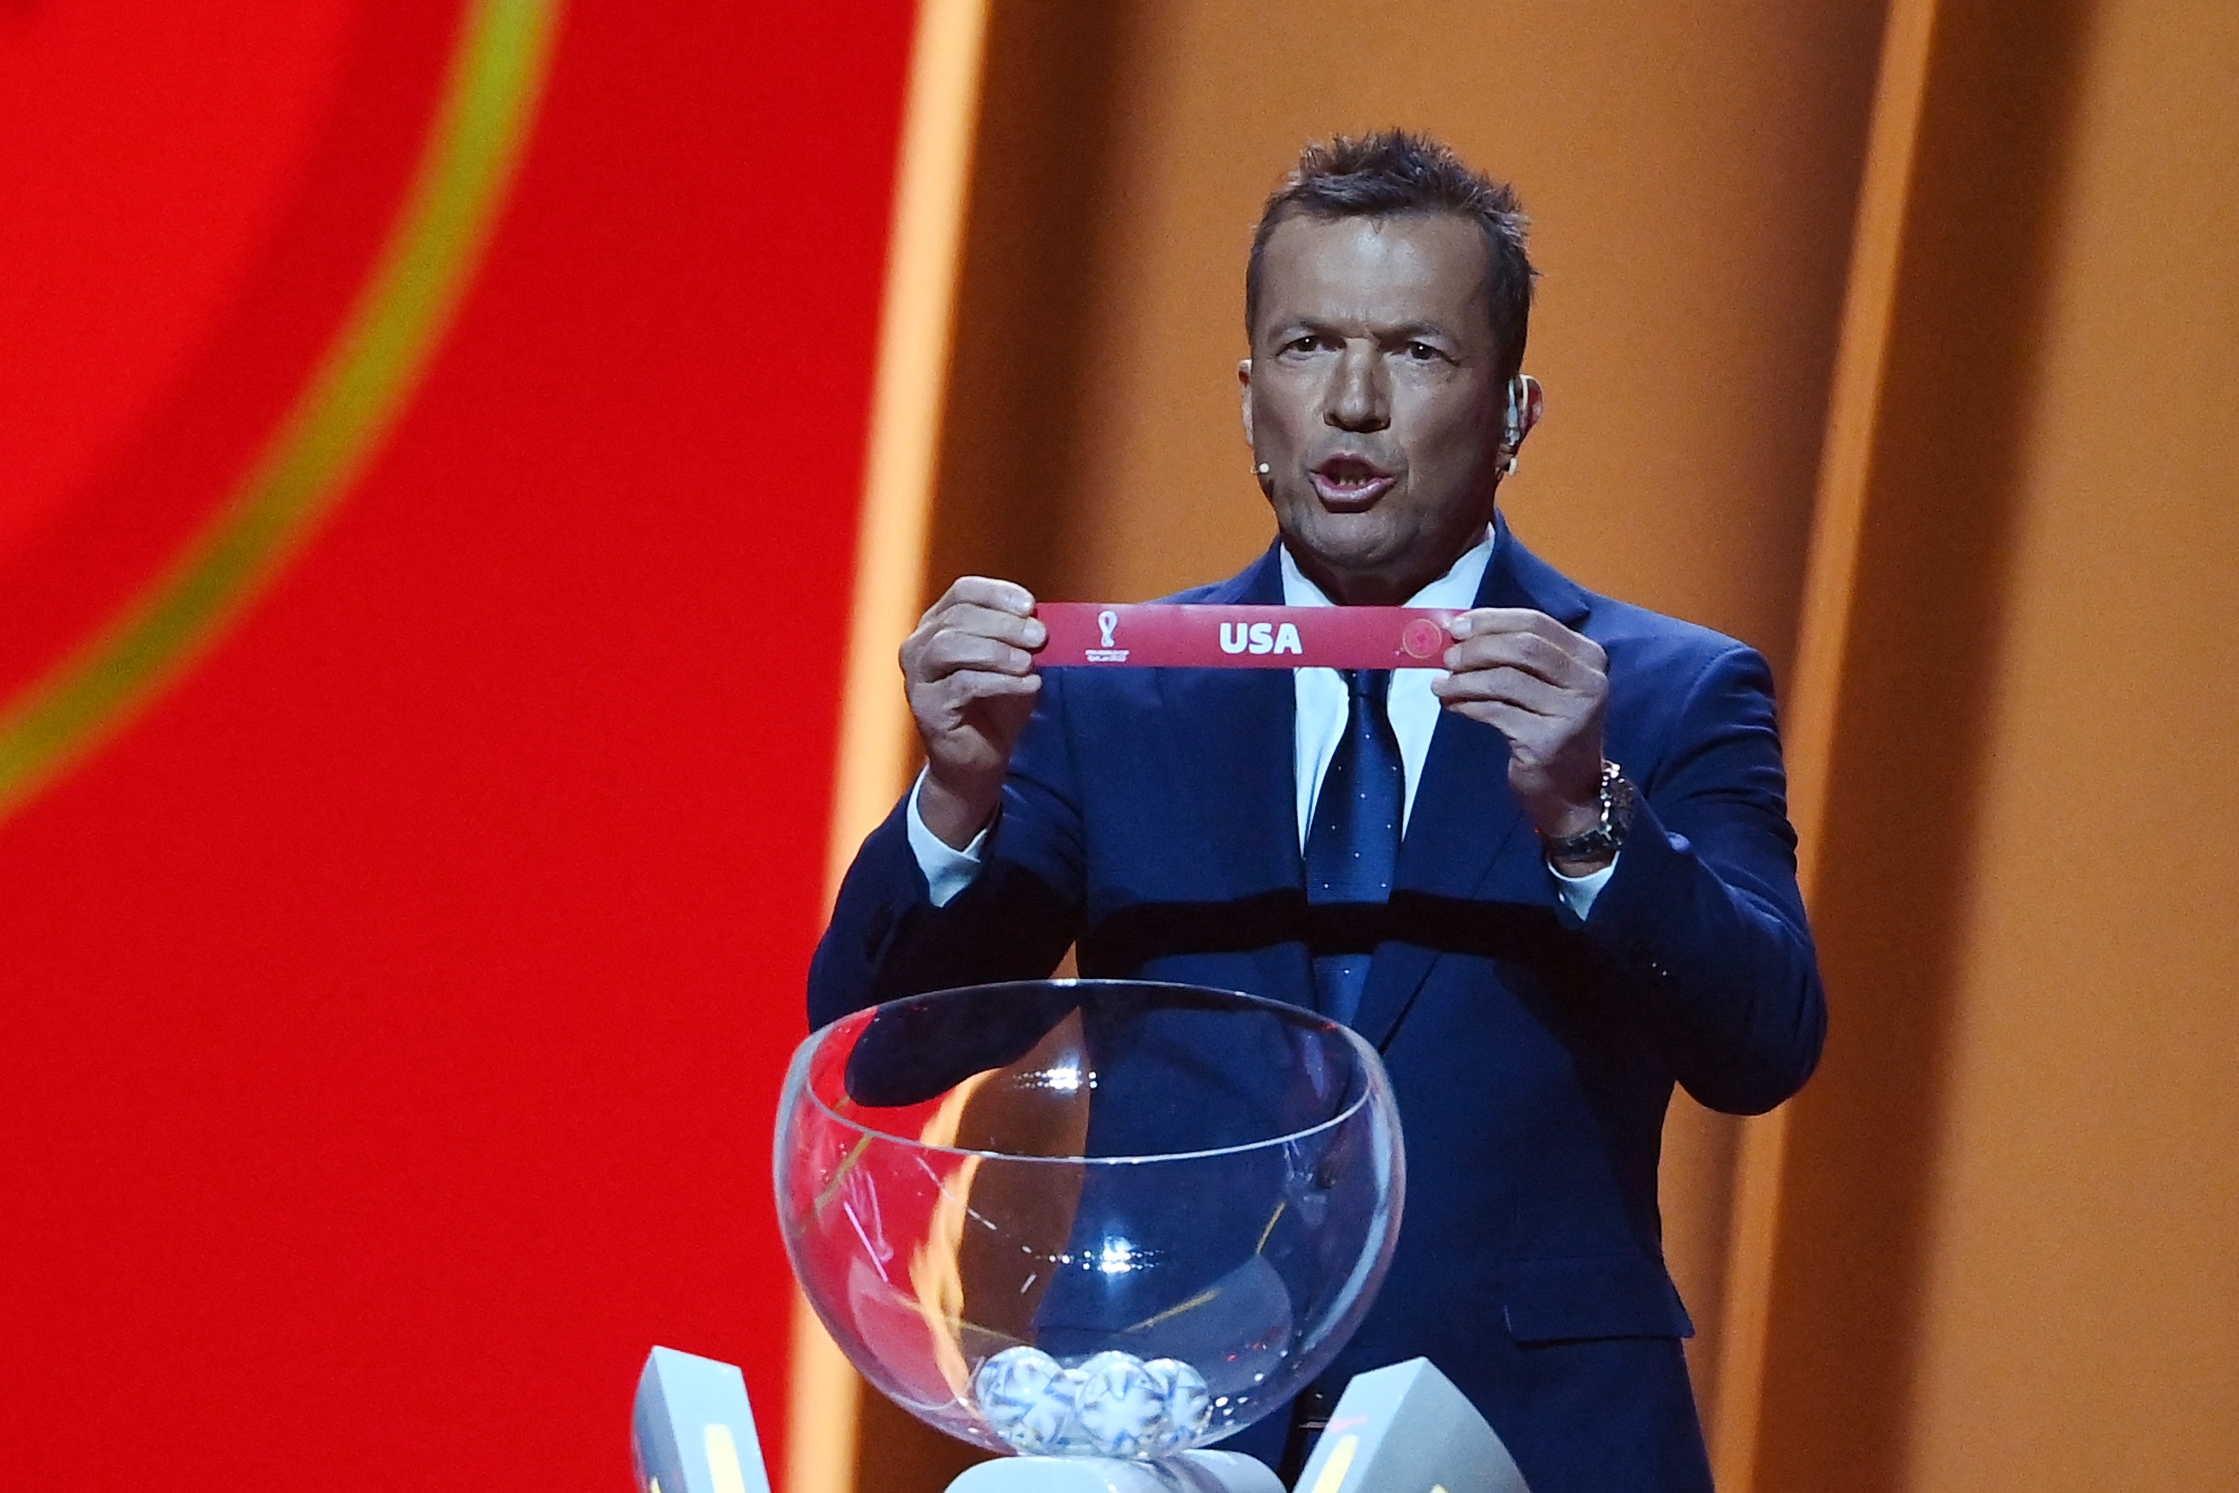 FIFA World Cup on X: Next stop: #FinalDraw Discover the groups on 1 April # FIFAWorldCup  / X